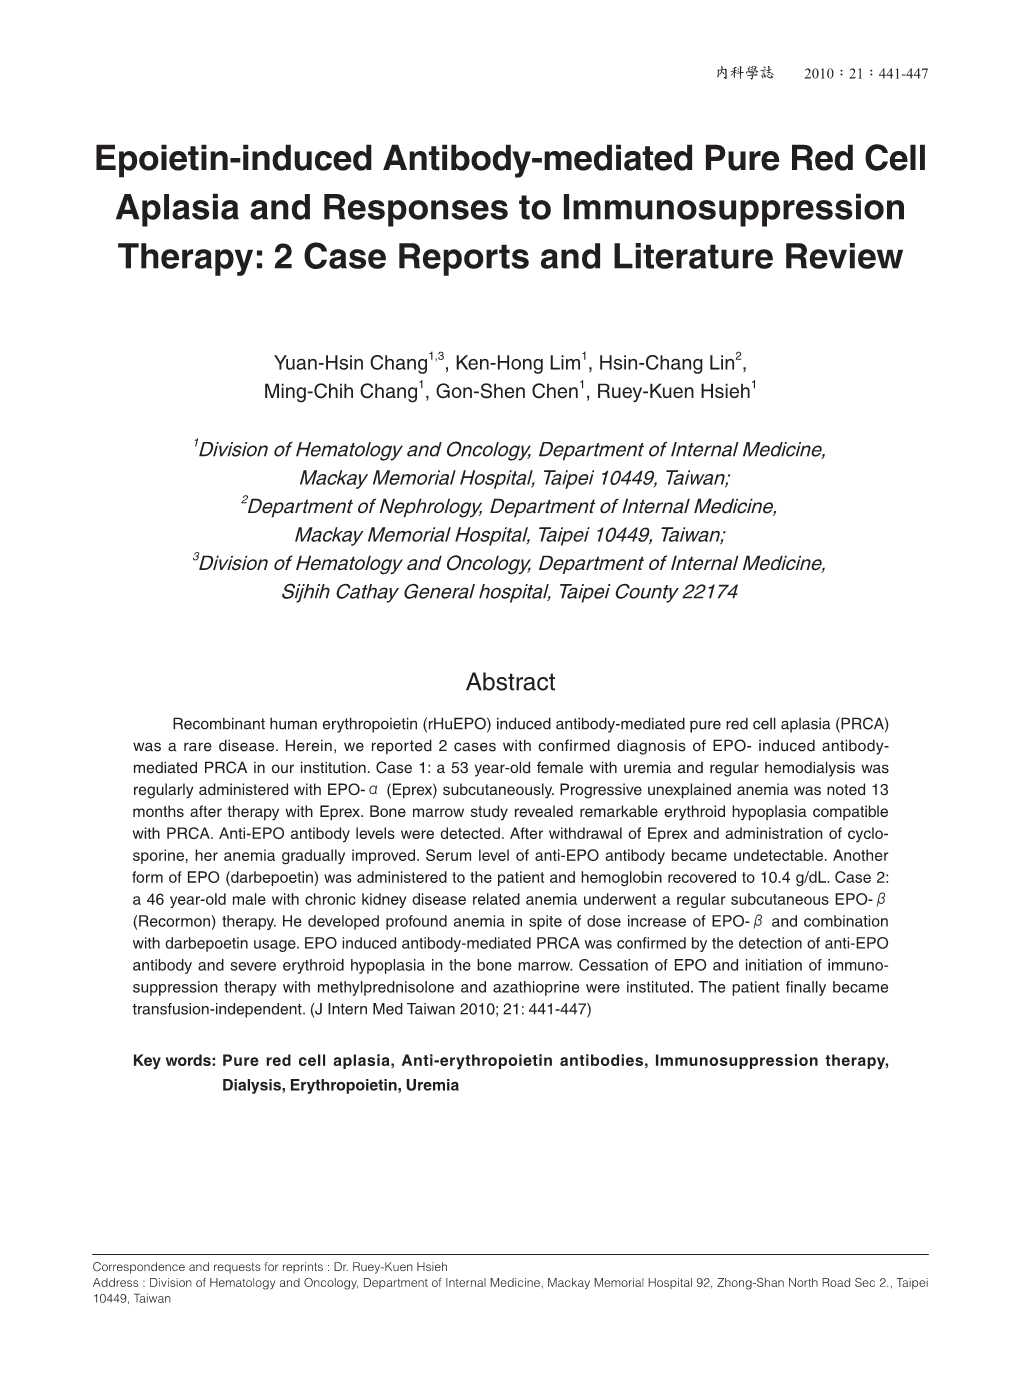 Epoietin-Induced Antibody-Mediated Pure Red Cell Aplasia and Responses to Immunosuppression Therapy: 2 Case Reports and Literature Review